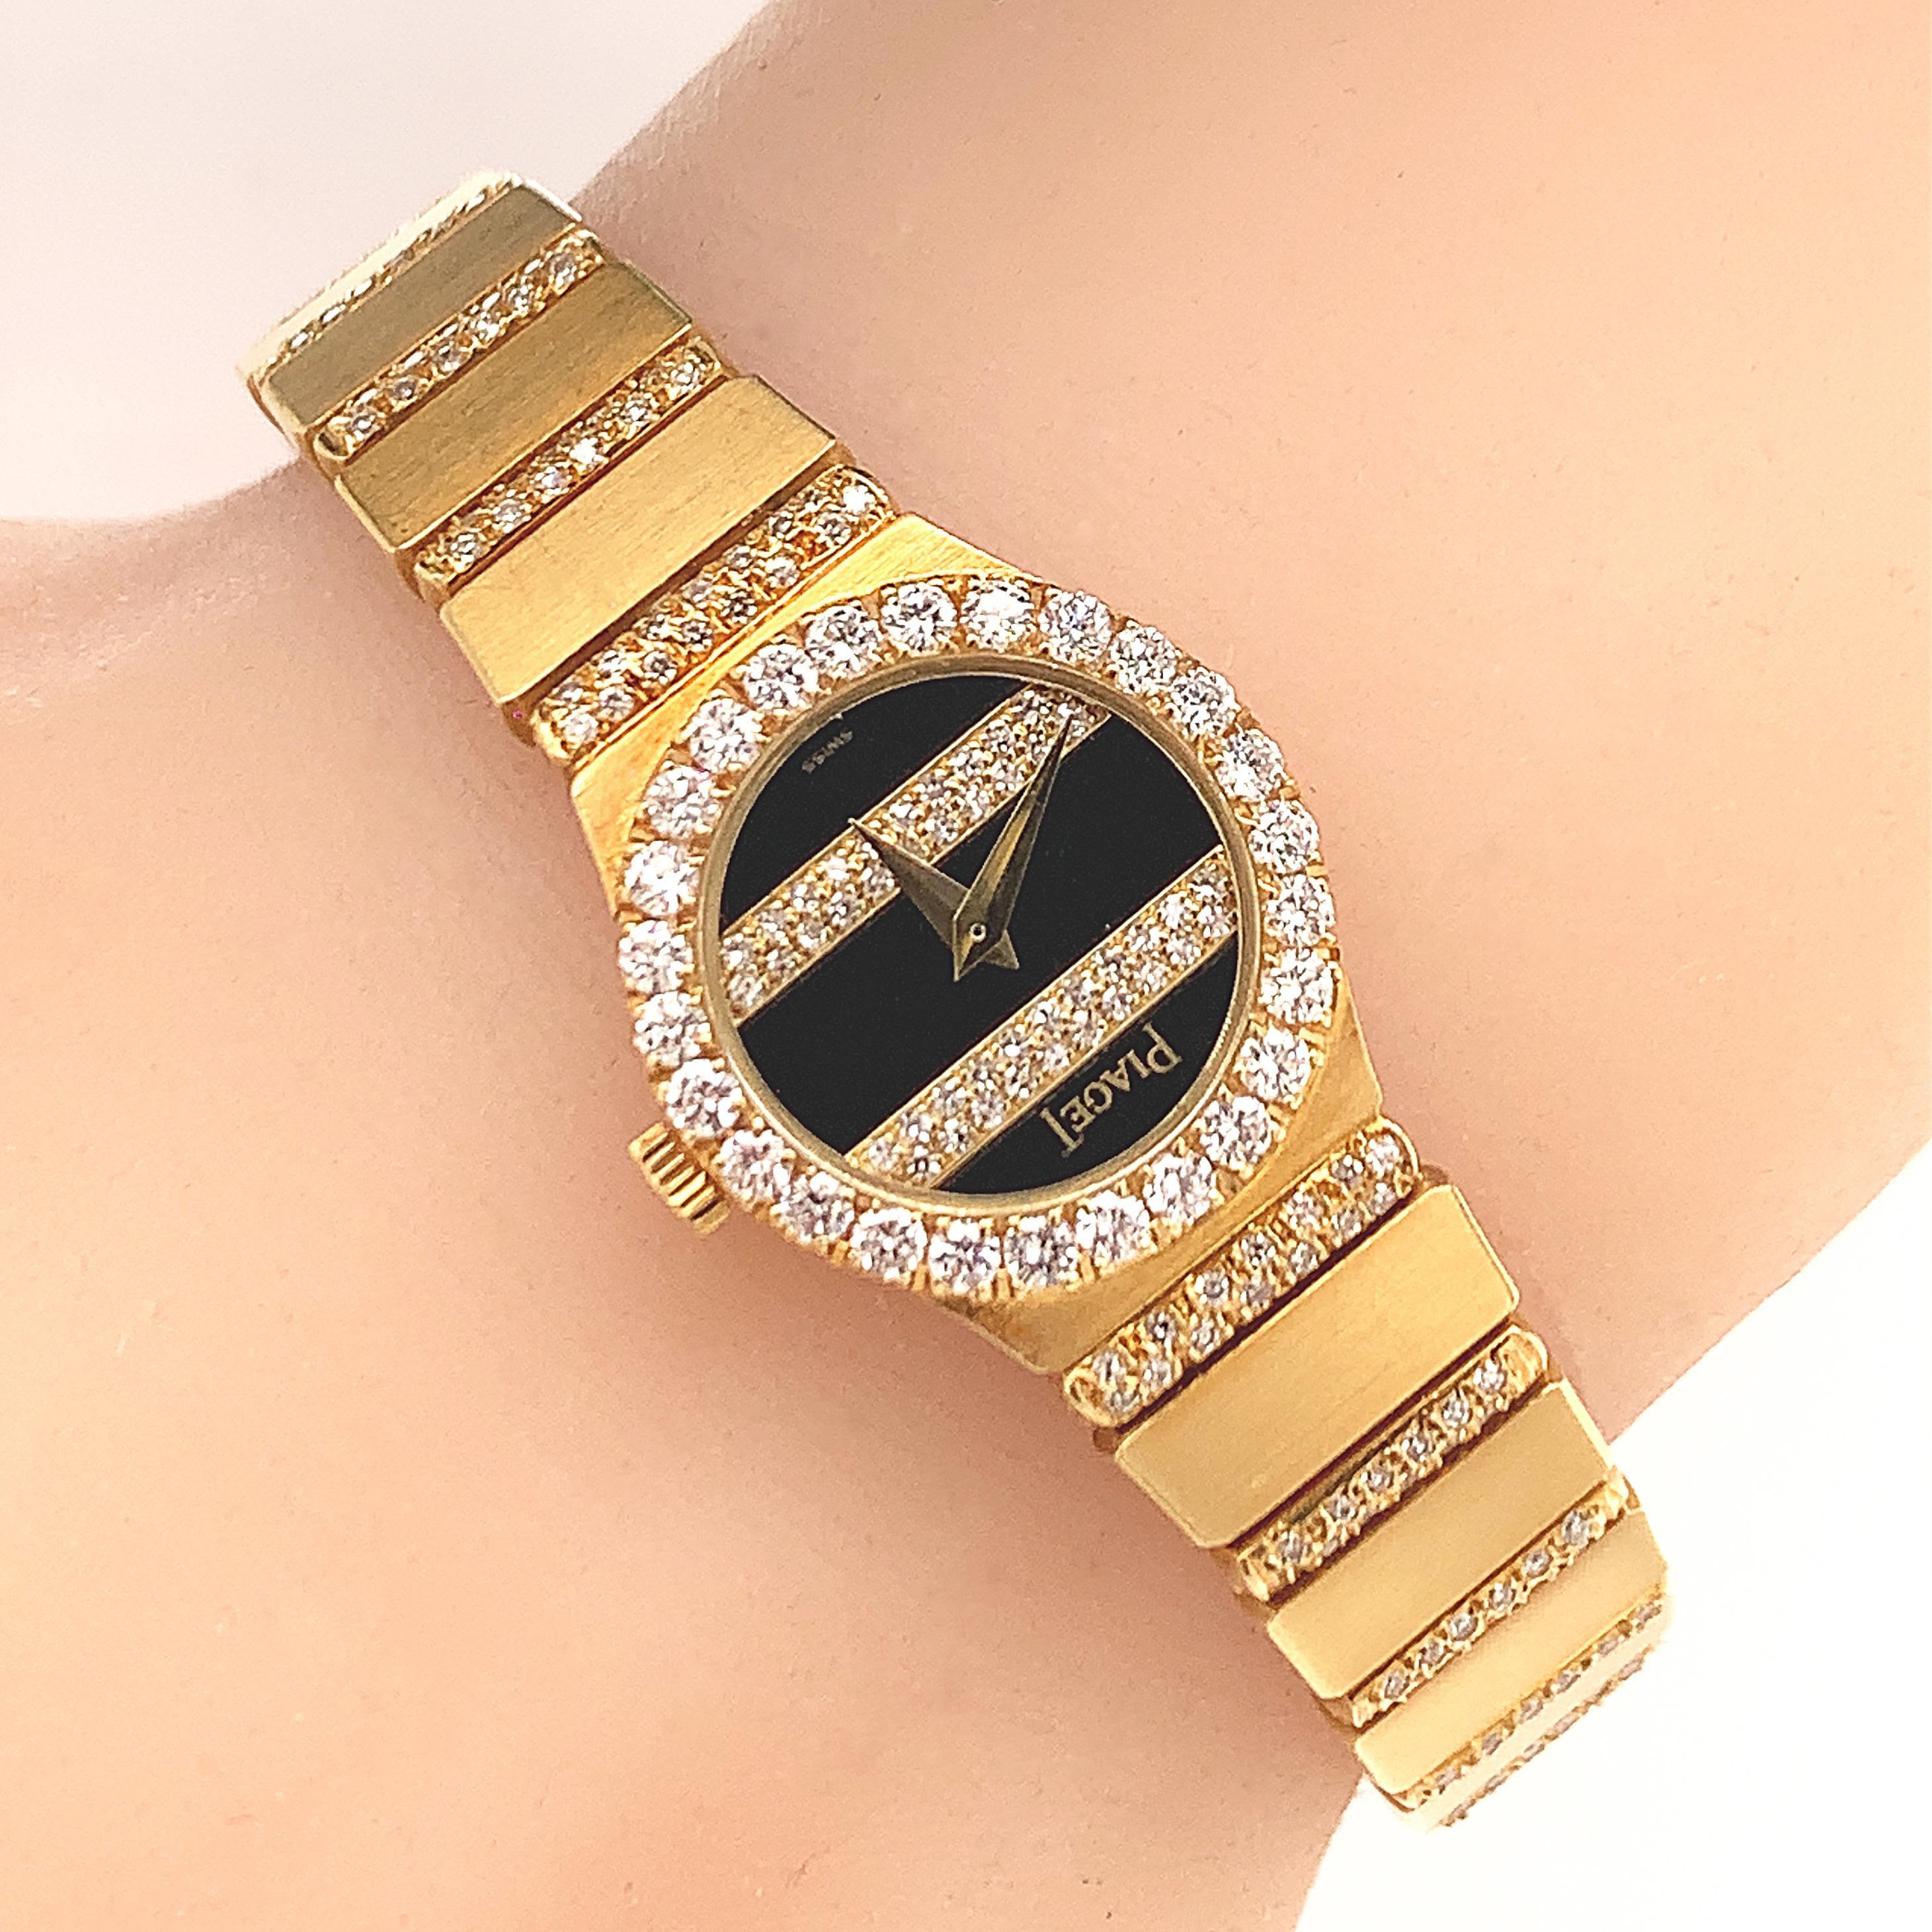 18K Y/gold Diamond with onyx dial watch, RBC and single cut diamonds weighing approx. 2.70 cts, EF VS, stamps PIAGET POLO 460797 846 0705 269 watch length 7 3/4 inches, weight 44.3 dwt.
Watch is not working and unlikely can be fixed 